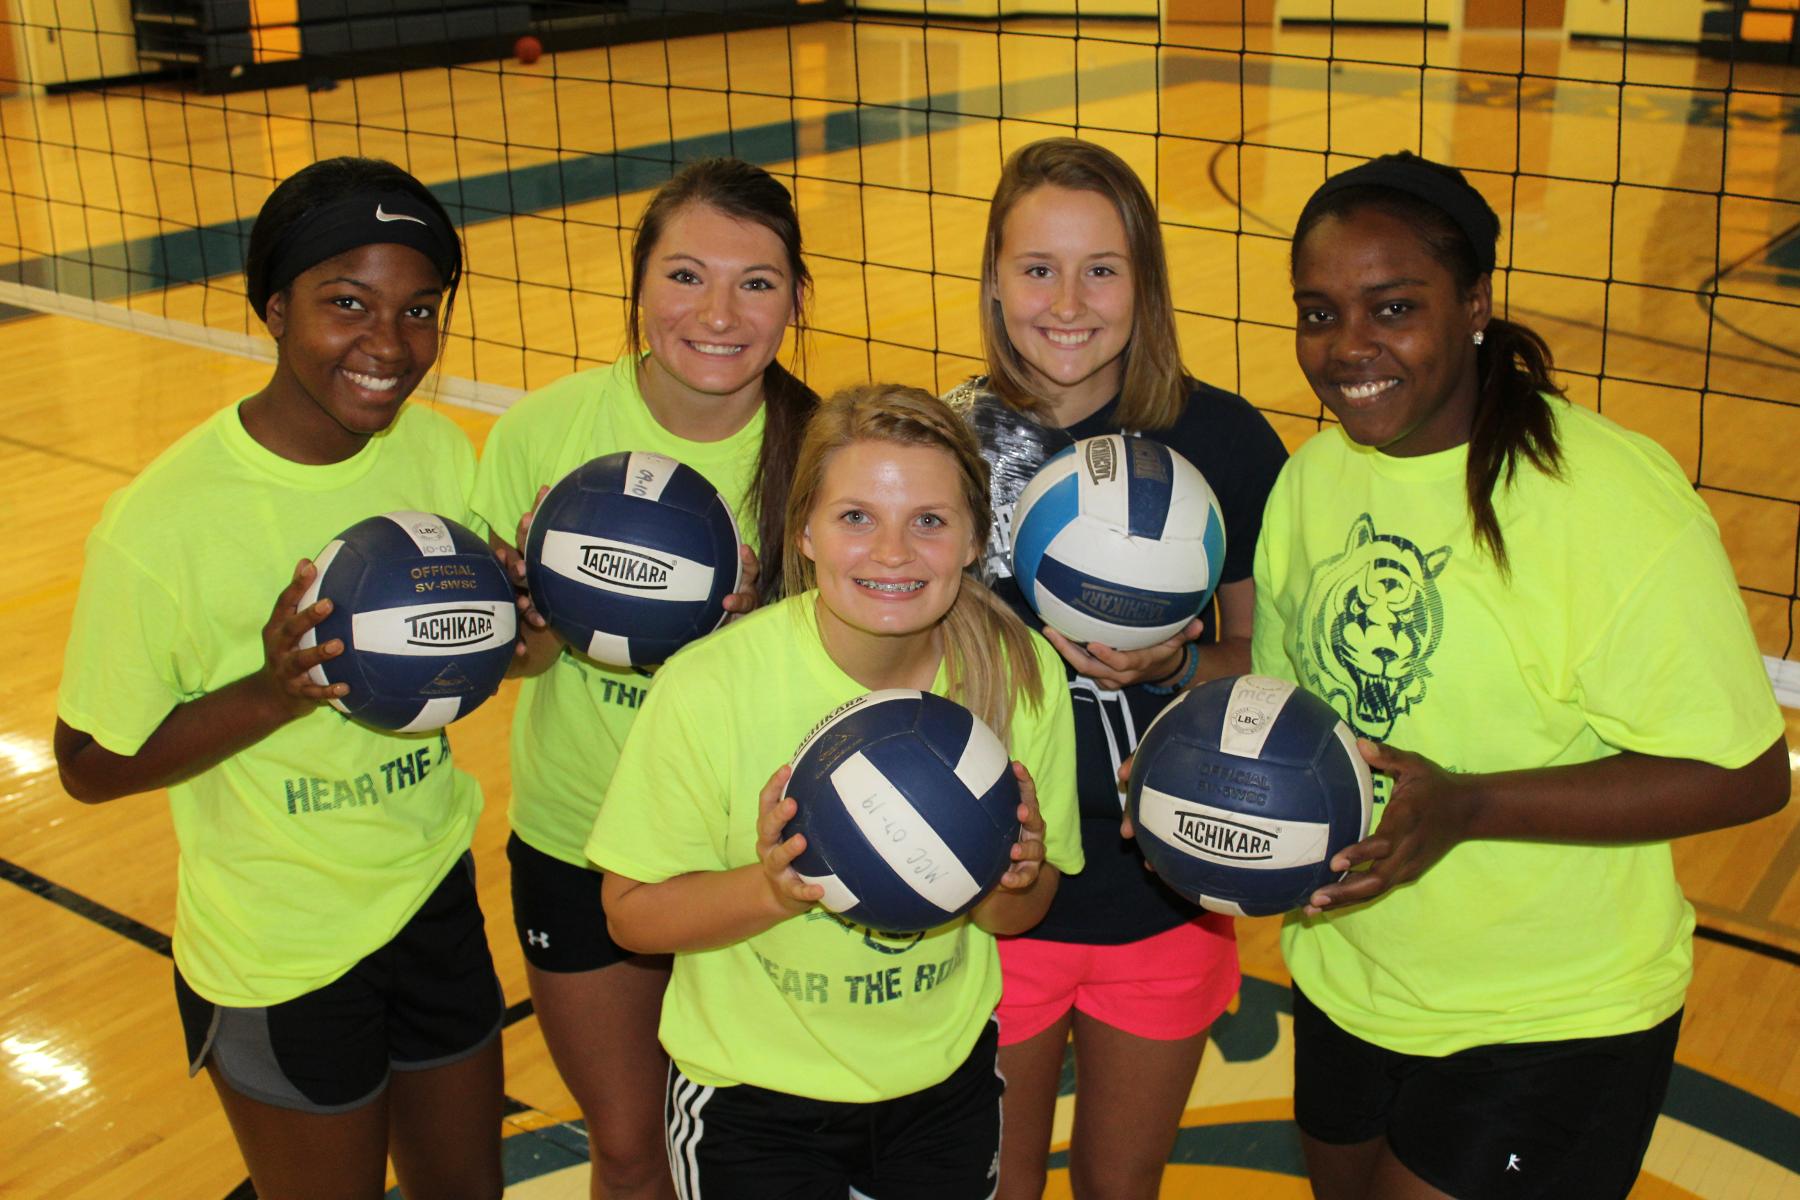 The MCC Volleyball team will depend on its five returning sophomores in 2016. (From L-R: DaNesha Cowley, Jordan Carter, Rieley Rodman, Nicole Montgomery, Paola Toledo)